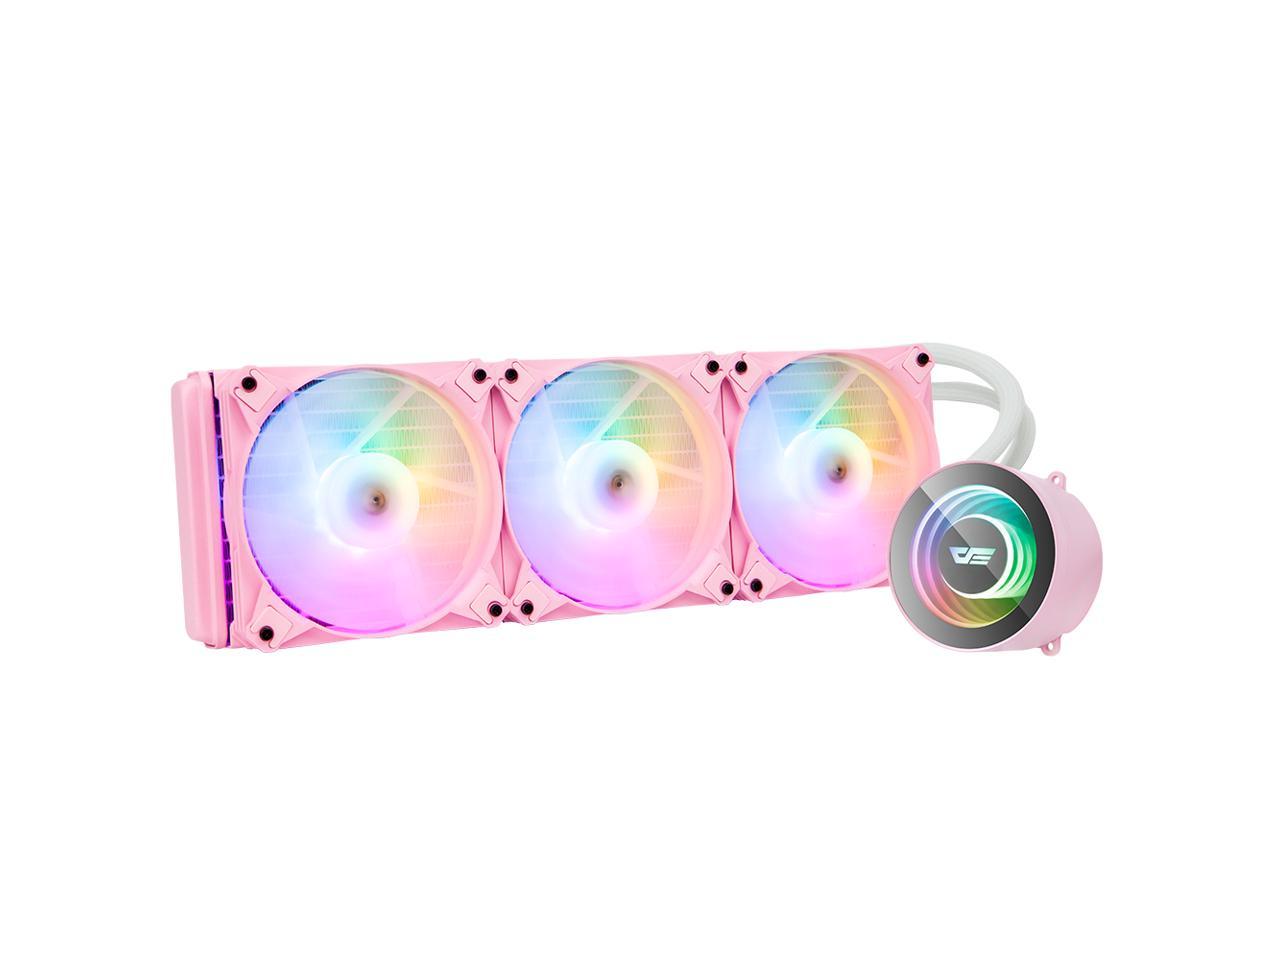 darkFlash DX360 Pink 360mm ARGB Radiator Addressable RGB All-in-one AIO CPU  Liquid Water Cooler 3X 120mm ARGB PWM Fans for Intel 1150/1151/1156 and 